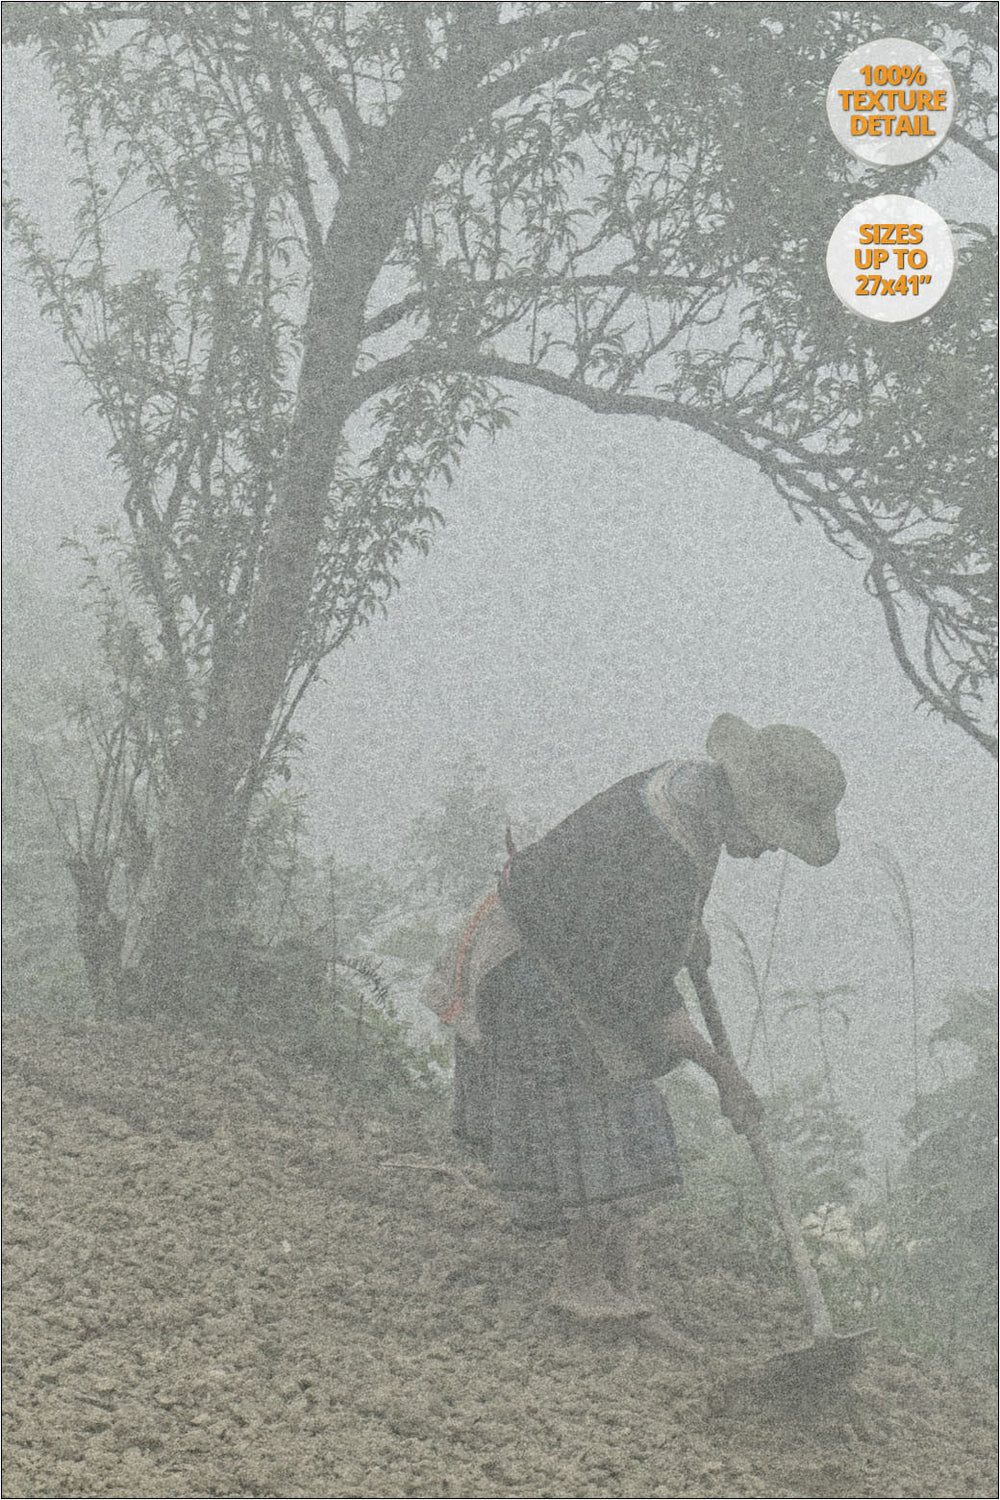 Hmong woman sowing in the fog, Bac Ha, Vietnam. | View at 100% Magnification Detail.